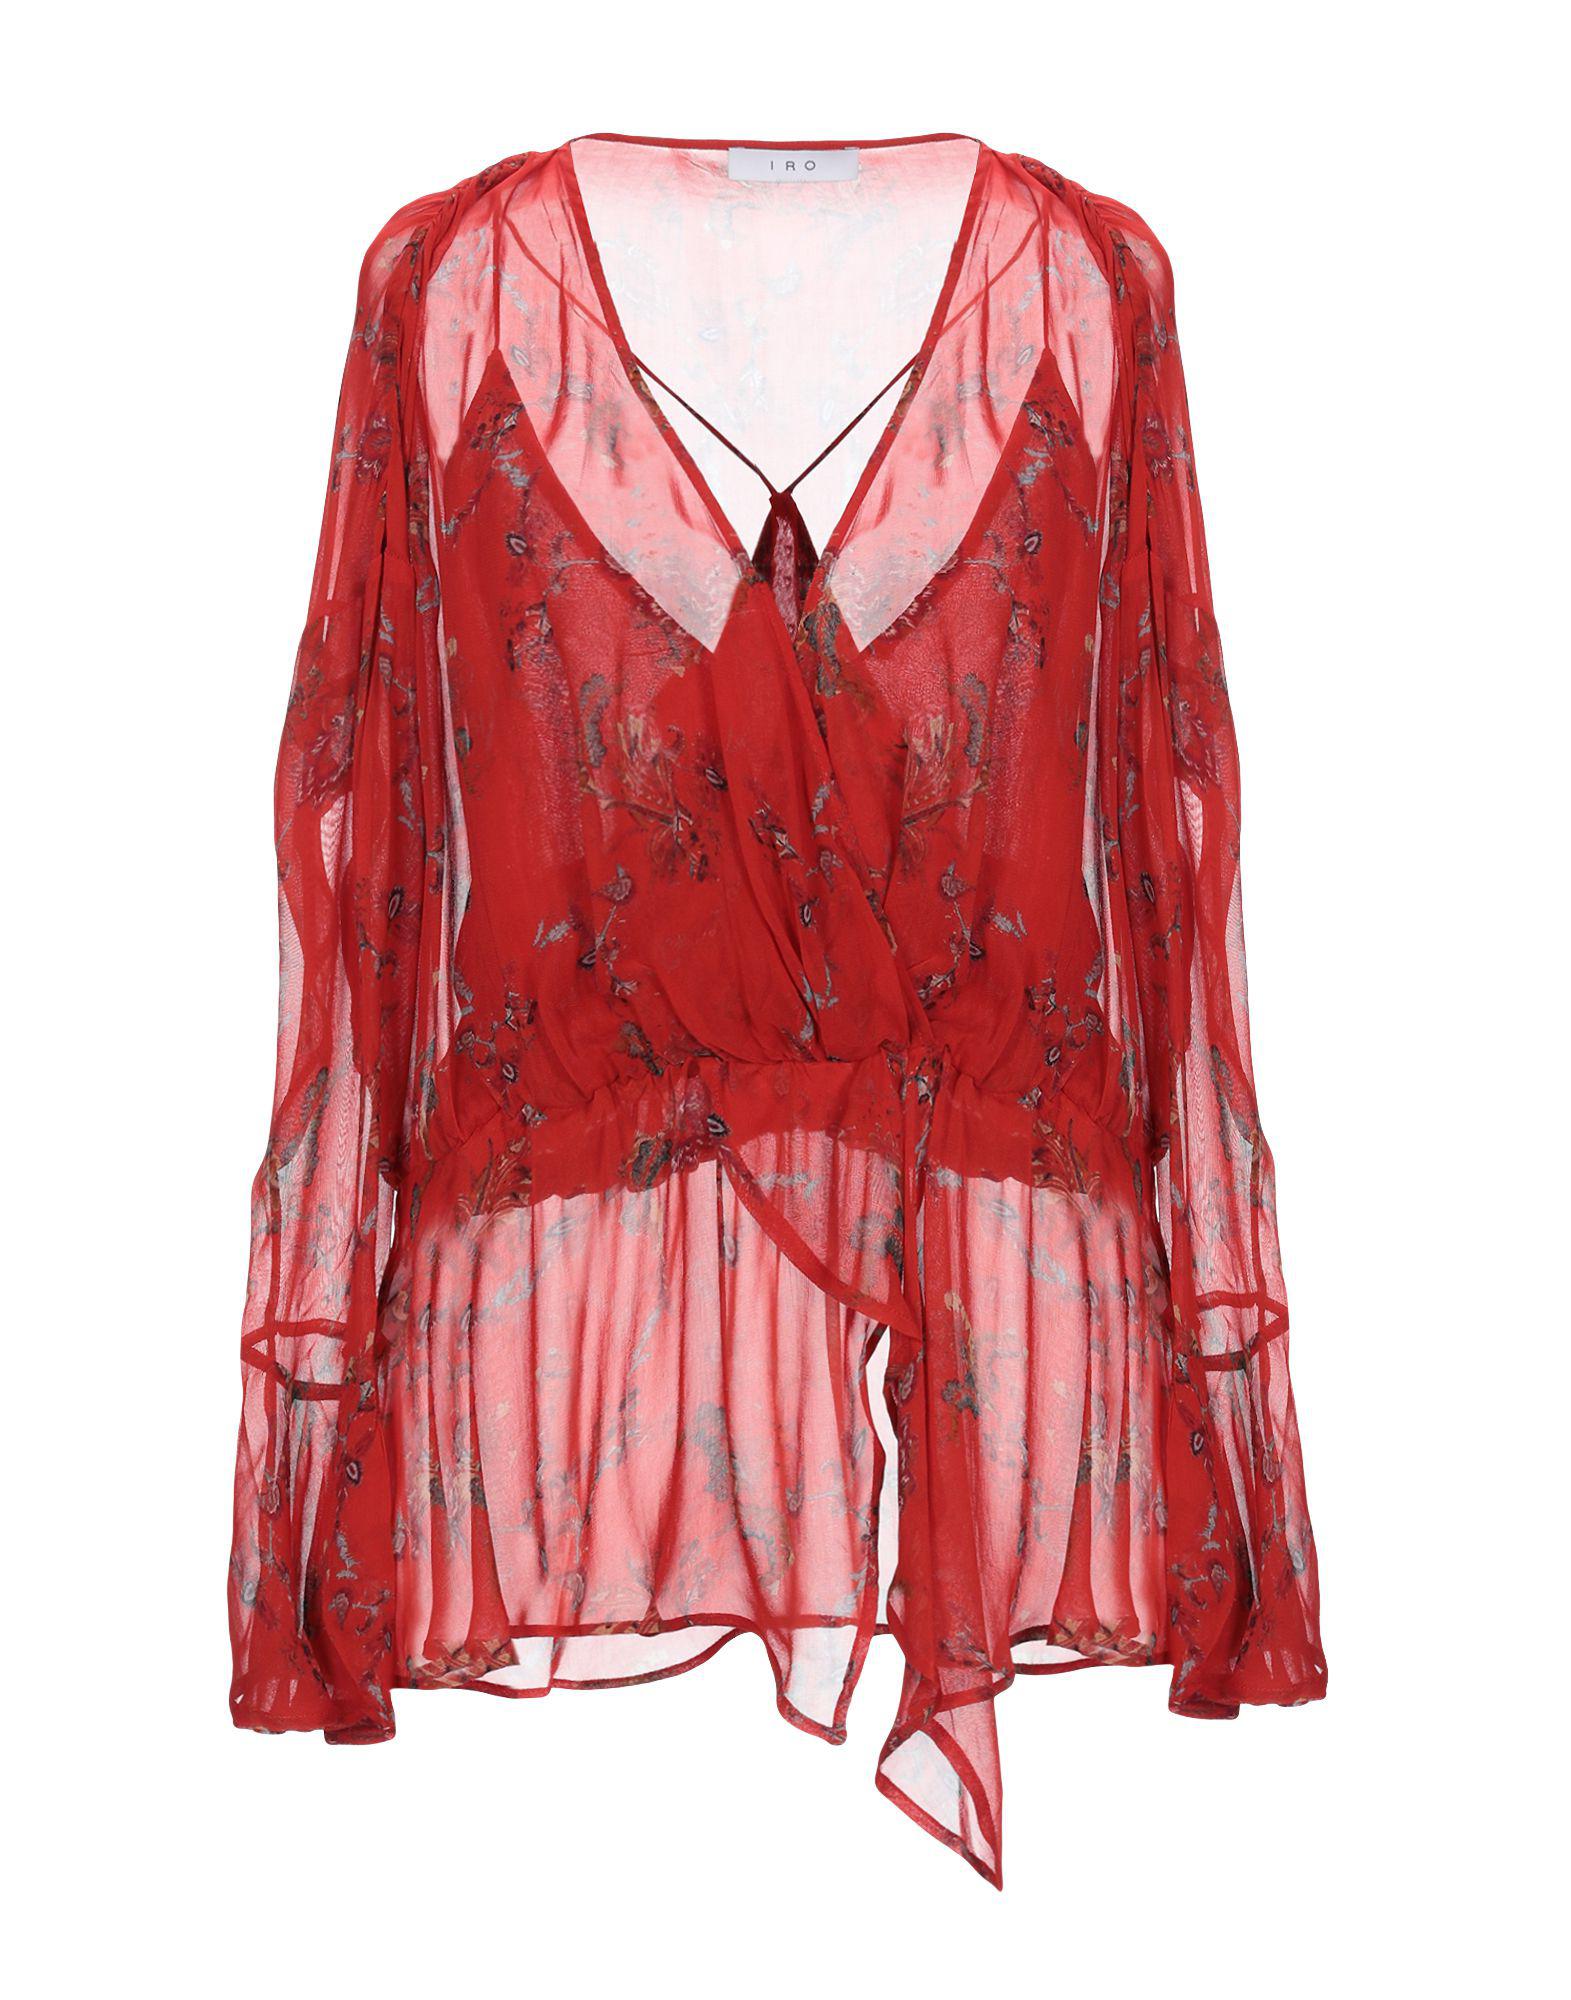 IRO Synthetic Blouse in Red - Lyst